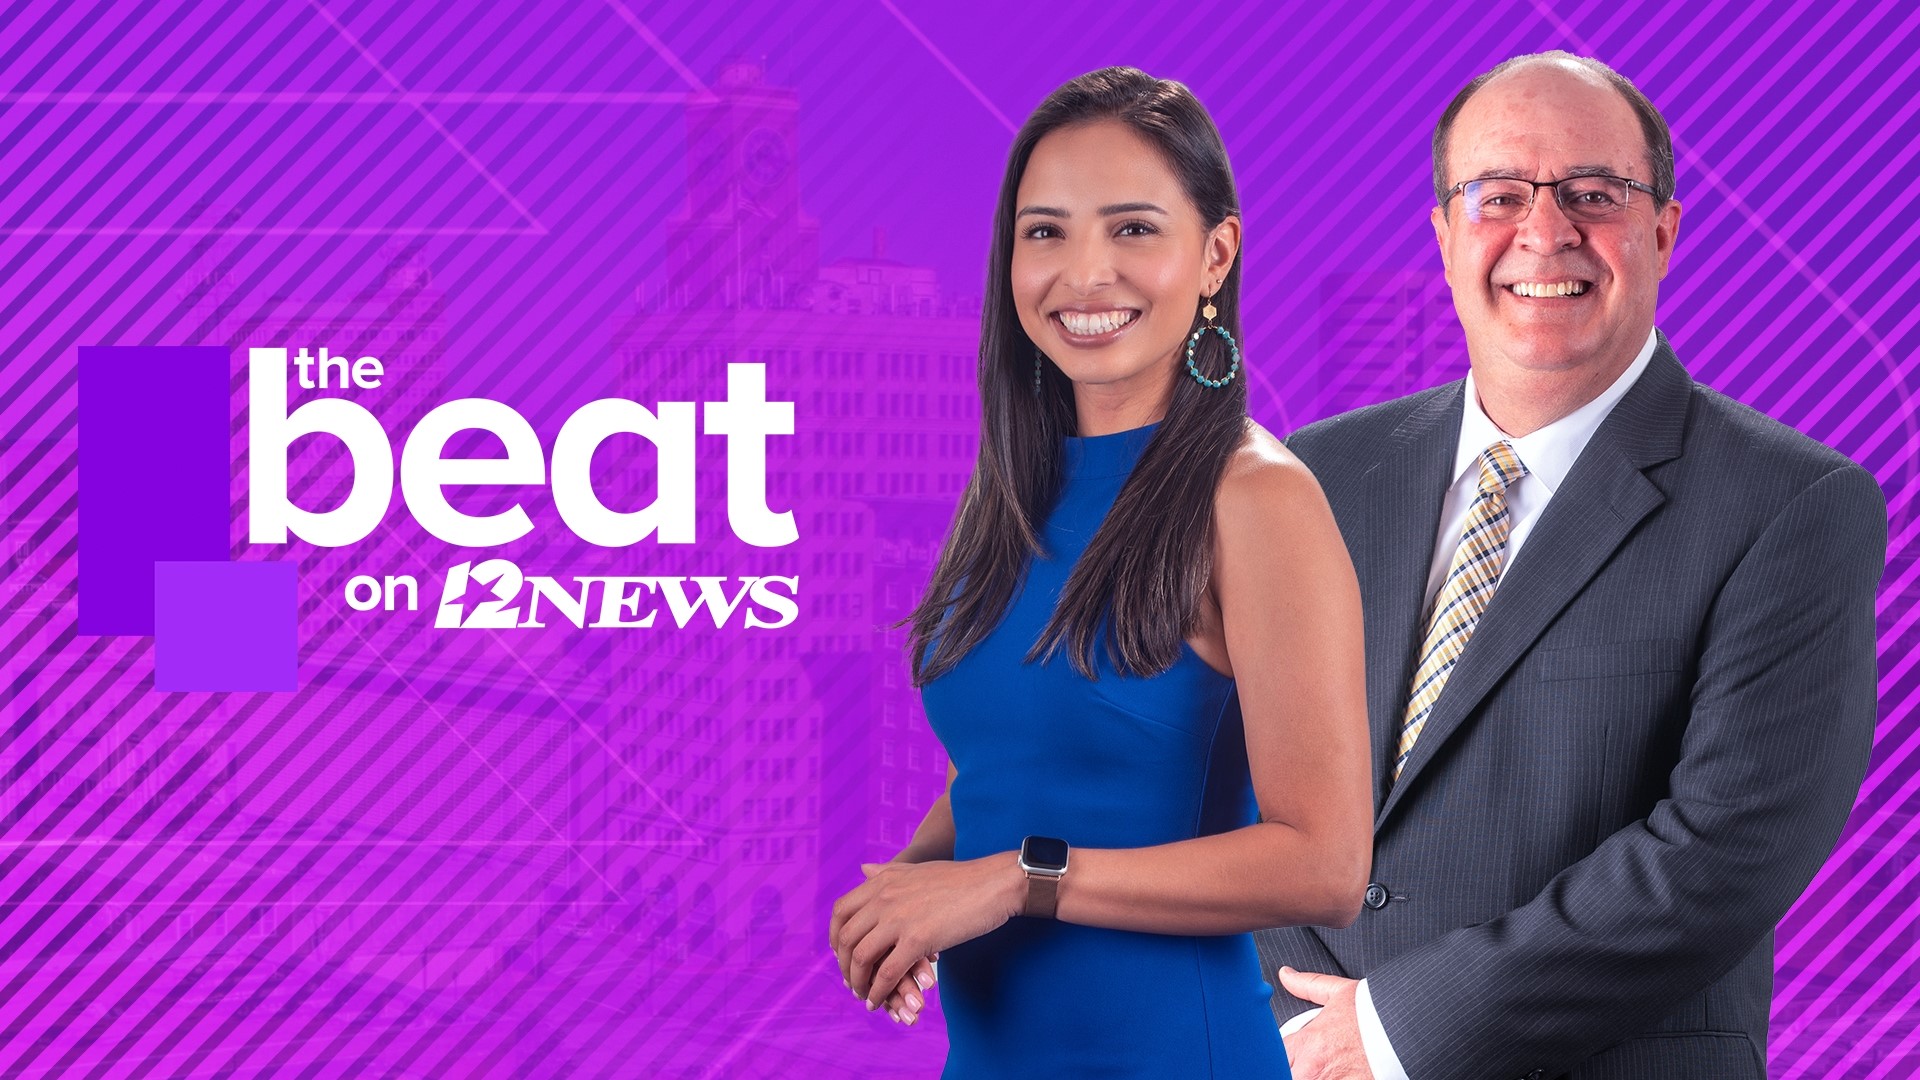 "The Beat" Southeast Texas' only local lifestyle & entertainment show focusing on news, weather and pop culture news.